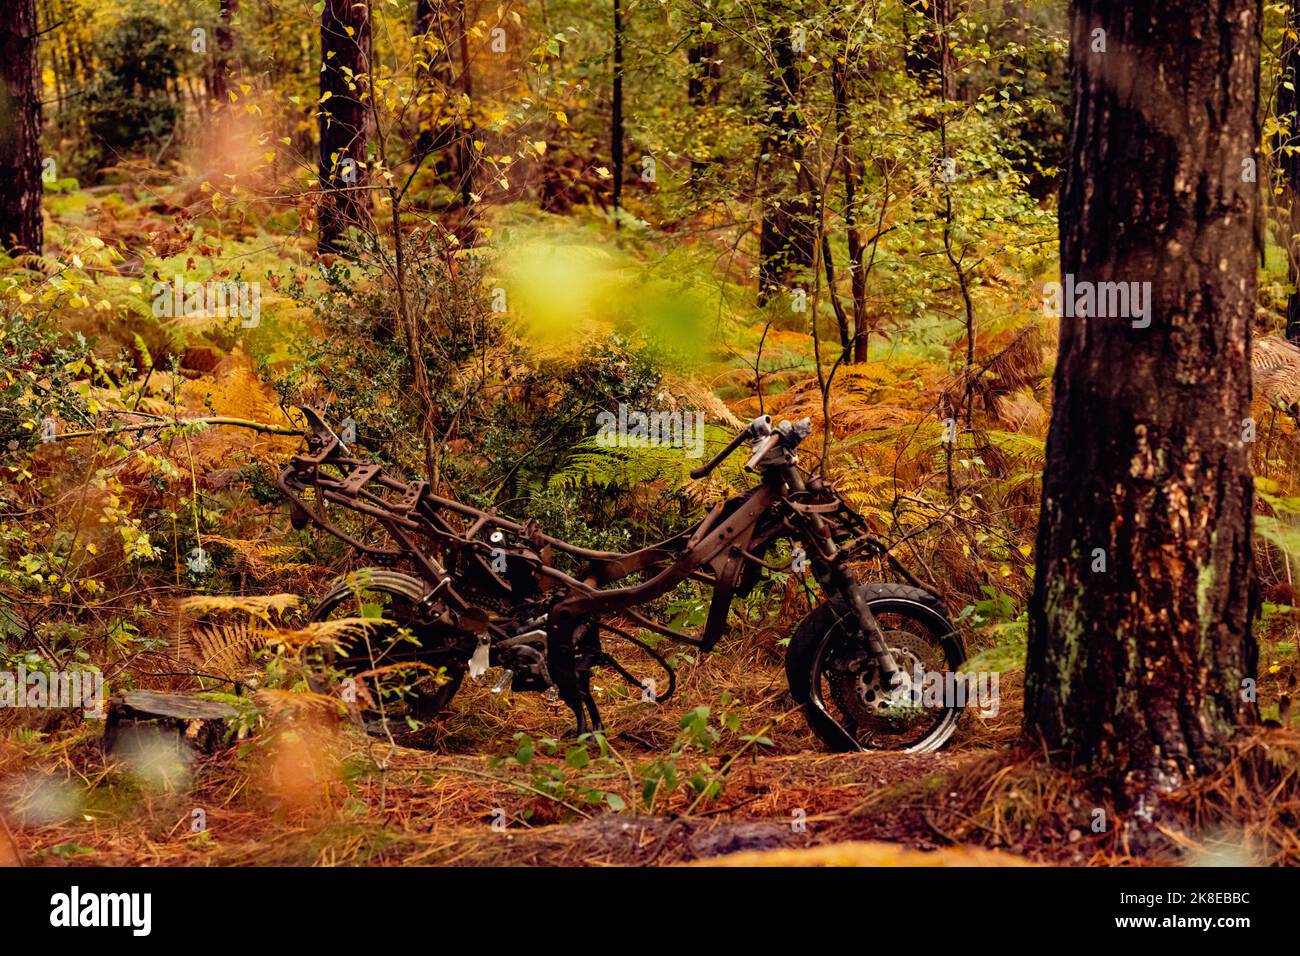 Abandoned Motorbike in a Forest Stock Photo